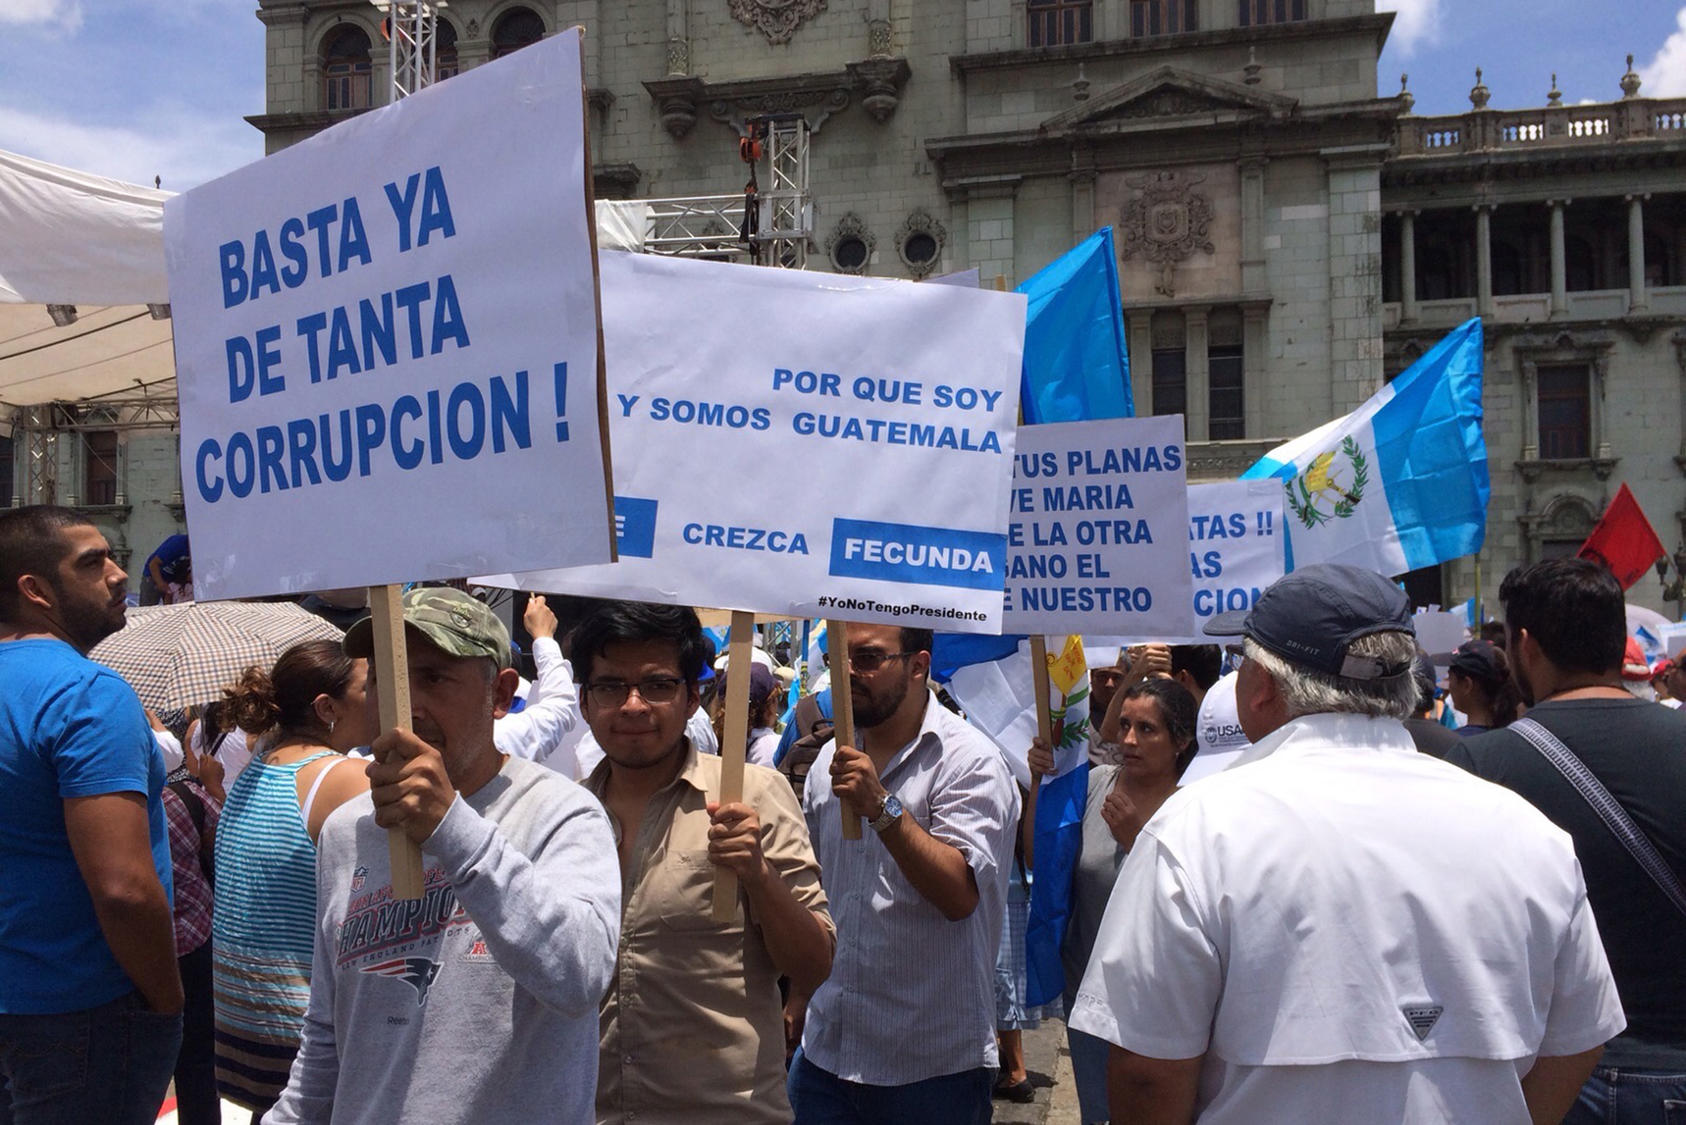 Protesters participating in a national strike against corruption in Guatemala. August 27, 2015. (Nerdoguate/Wikimedia Commons)